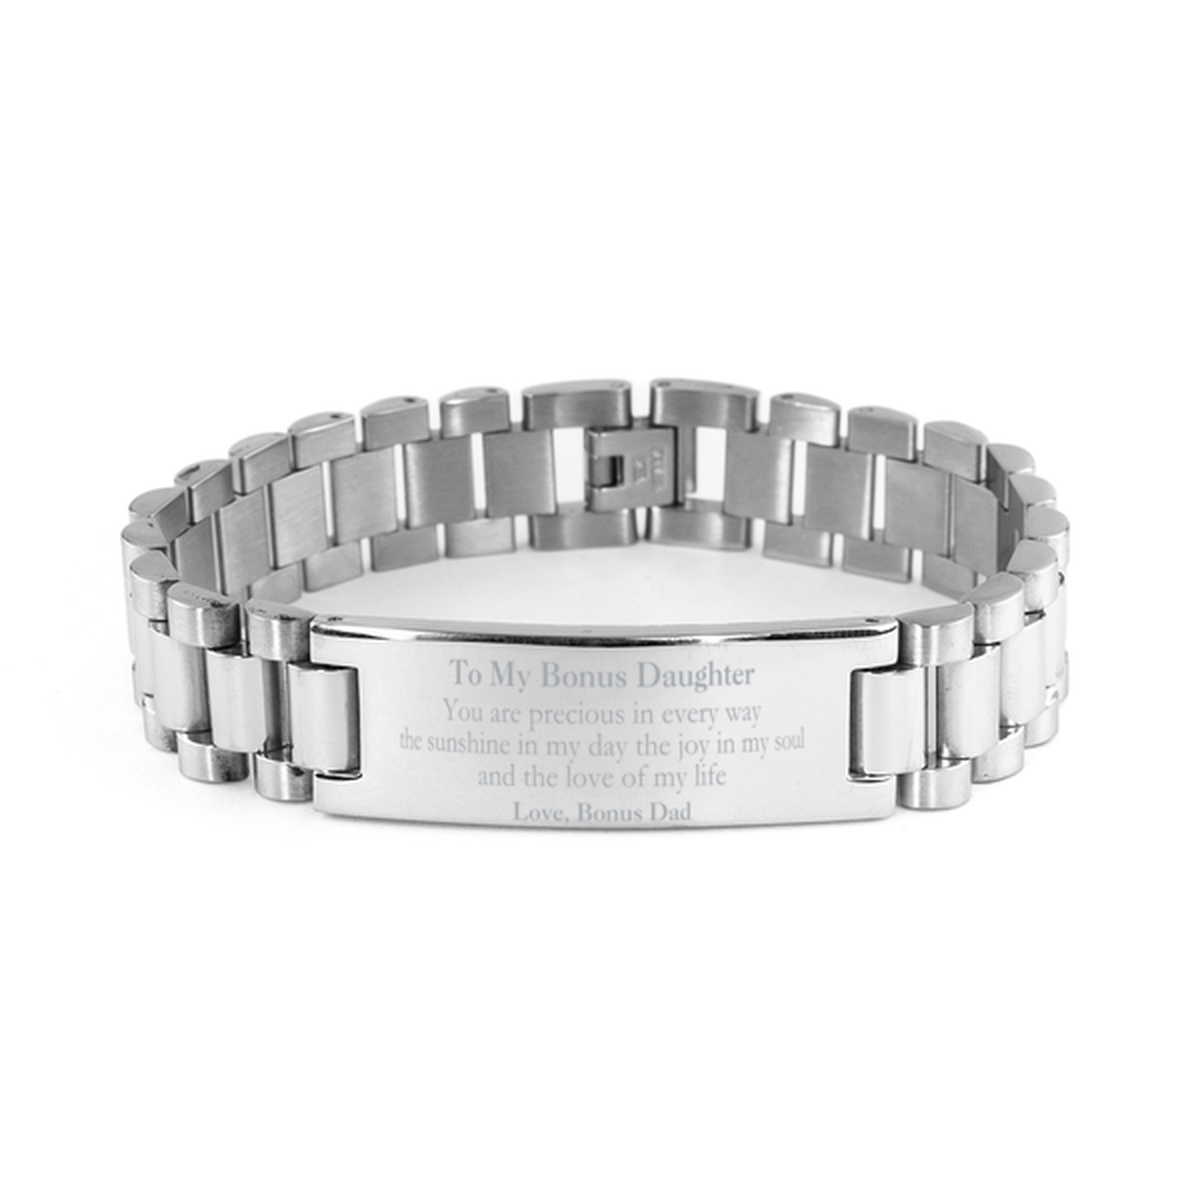 Graduation Gifts for Bonus Daughter Ladder Stainless Steel Bracelet Present from Bonus Dad, Christmas Bonus Daughter Birthday Gifts Bonus Daughter You are precious in every way the sunshine in my day. Love, Bonus Dad